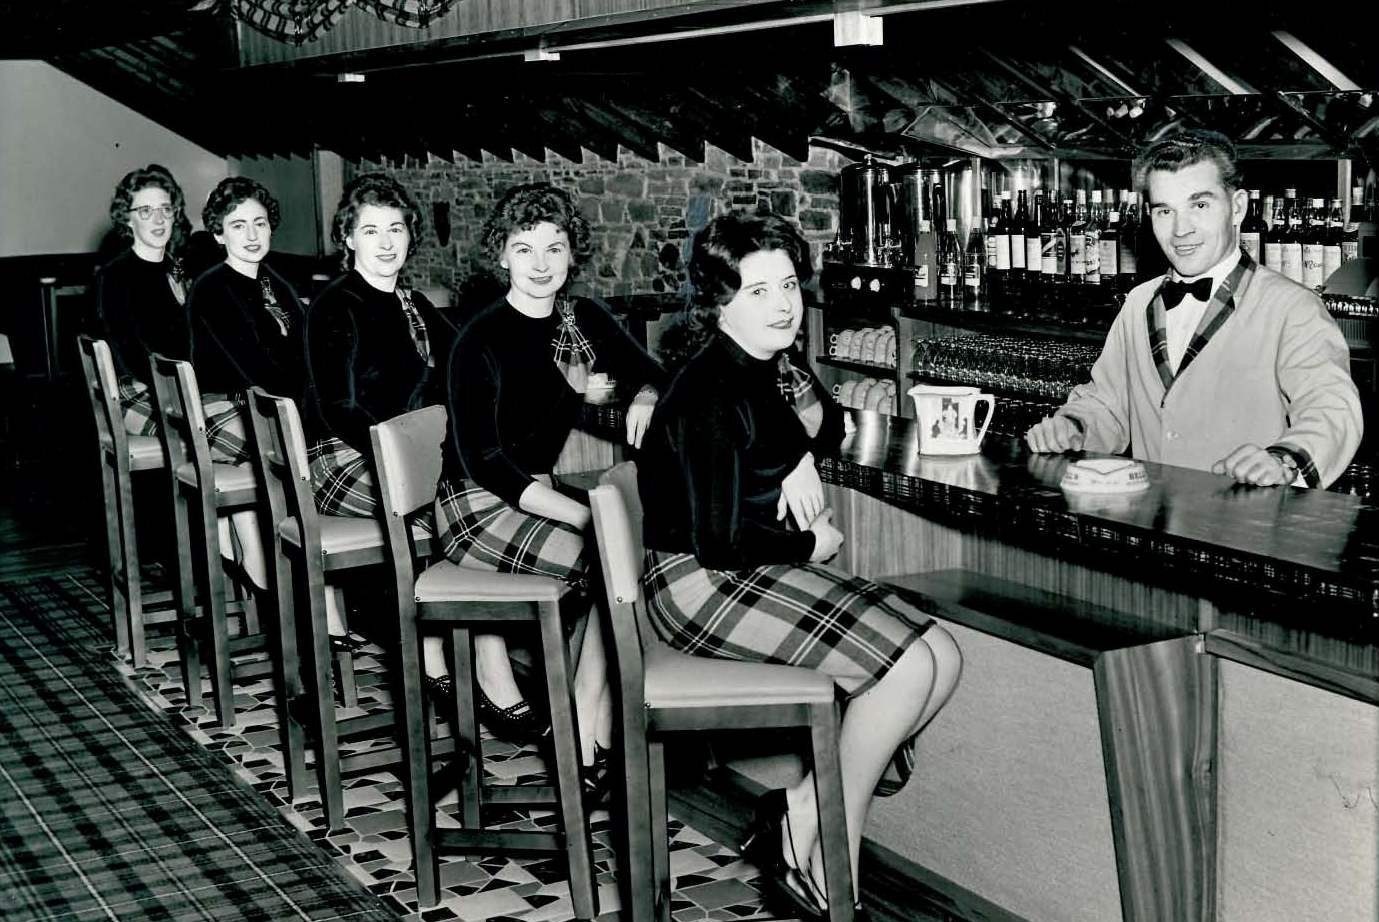 Waiting staff in the Royal's lounge during the hotel's previous heyday, dated October 1962.